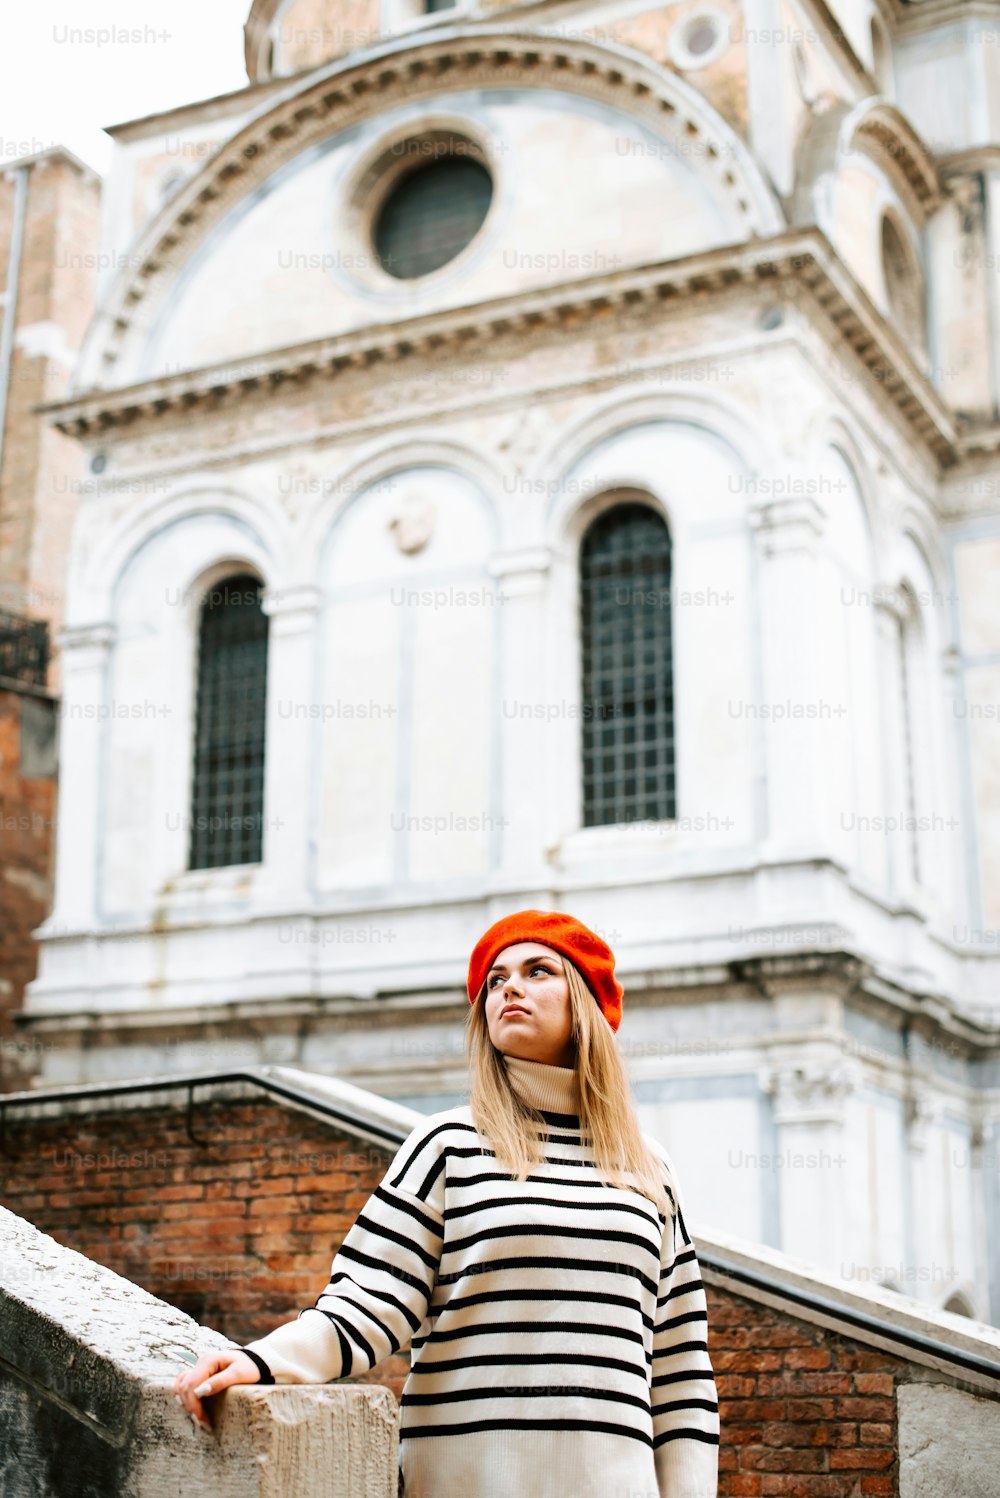 a woman in a striped shirt and orange hat